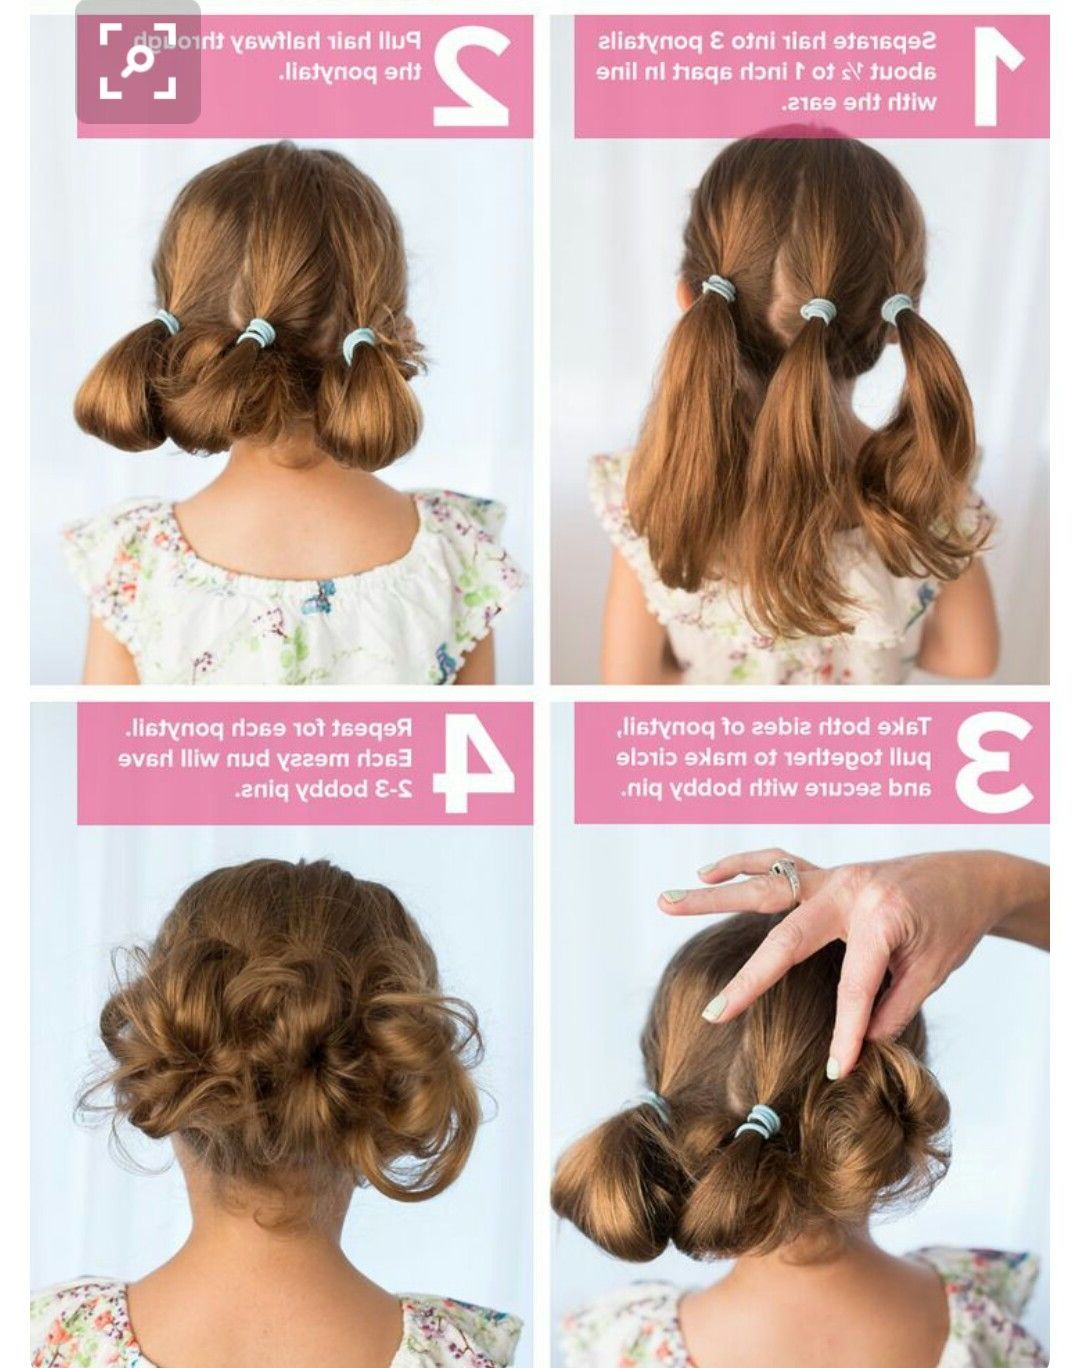 Easy Hairstyles For Medium Hair For School – Hairstyles For Women Inside Most Current Medium Hairstyles With Bobby Pins (View 20 of 20)